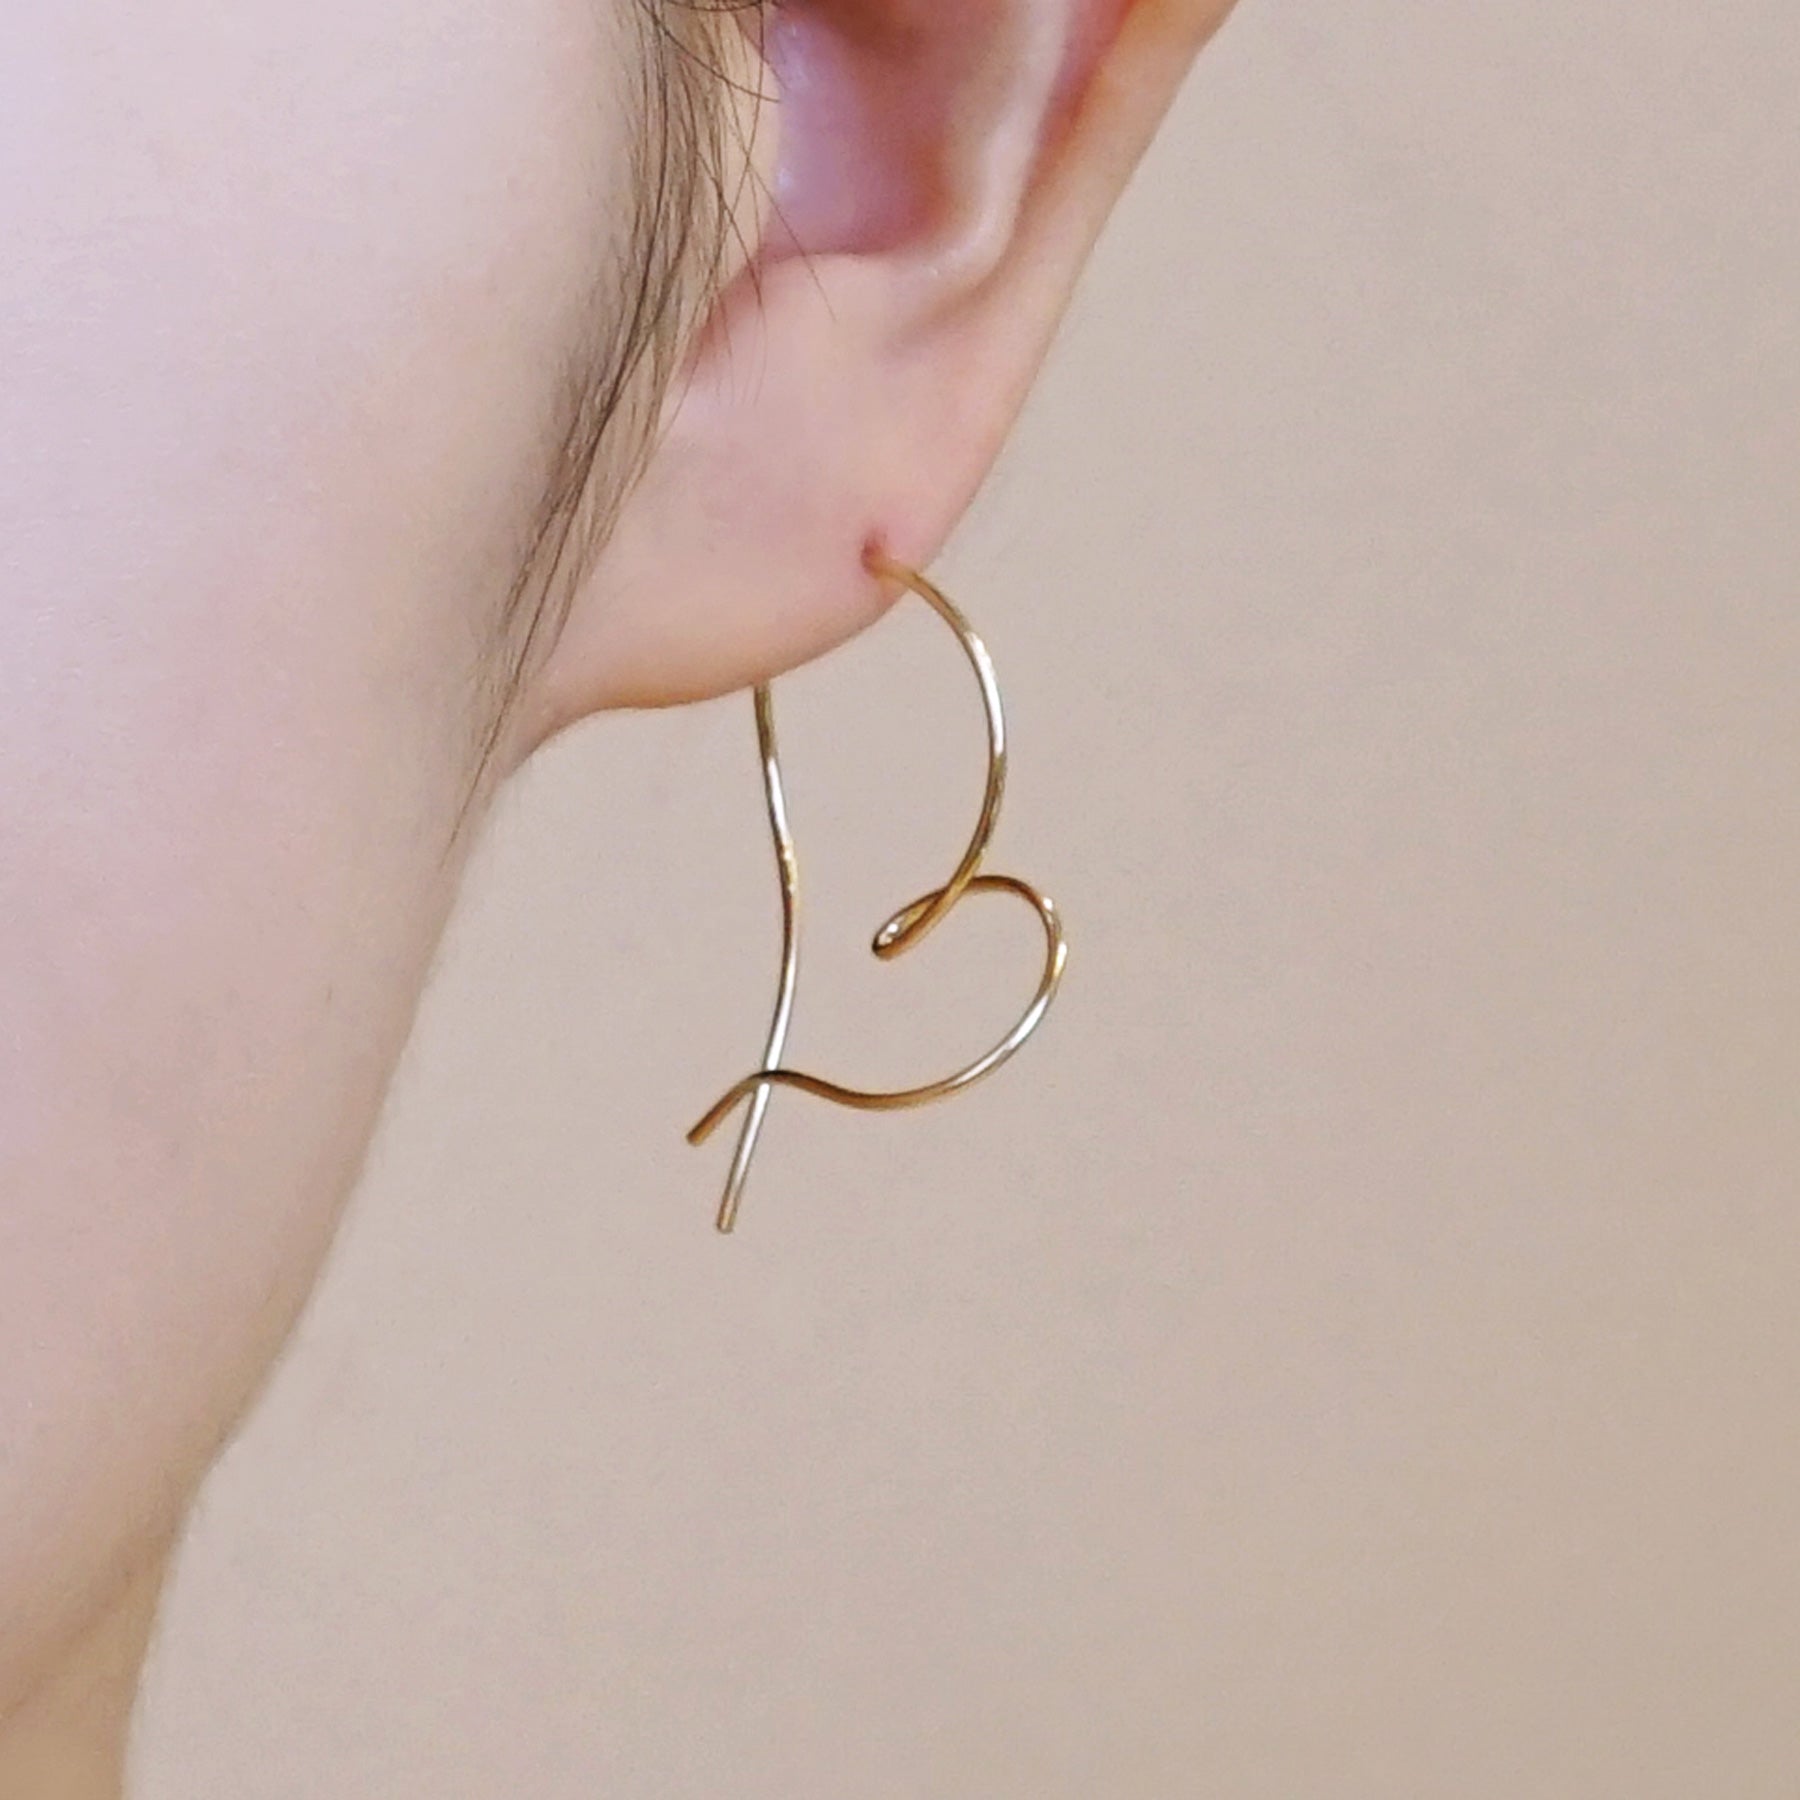 Gold Filled Twisted Heart Earrings - Model Image